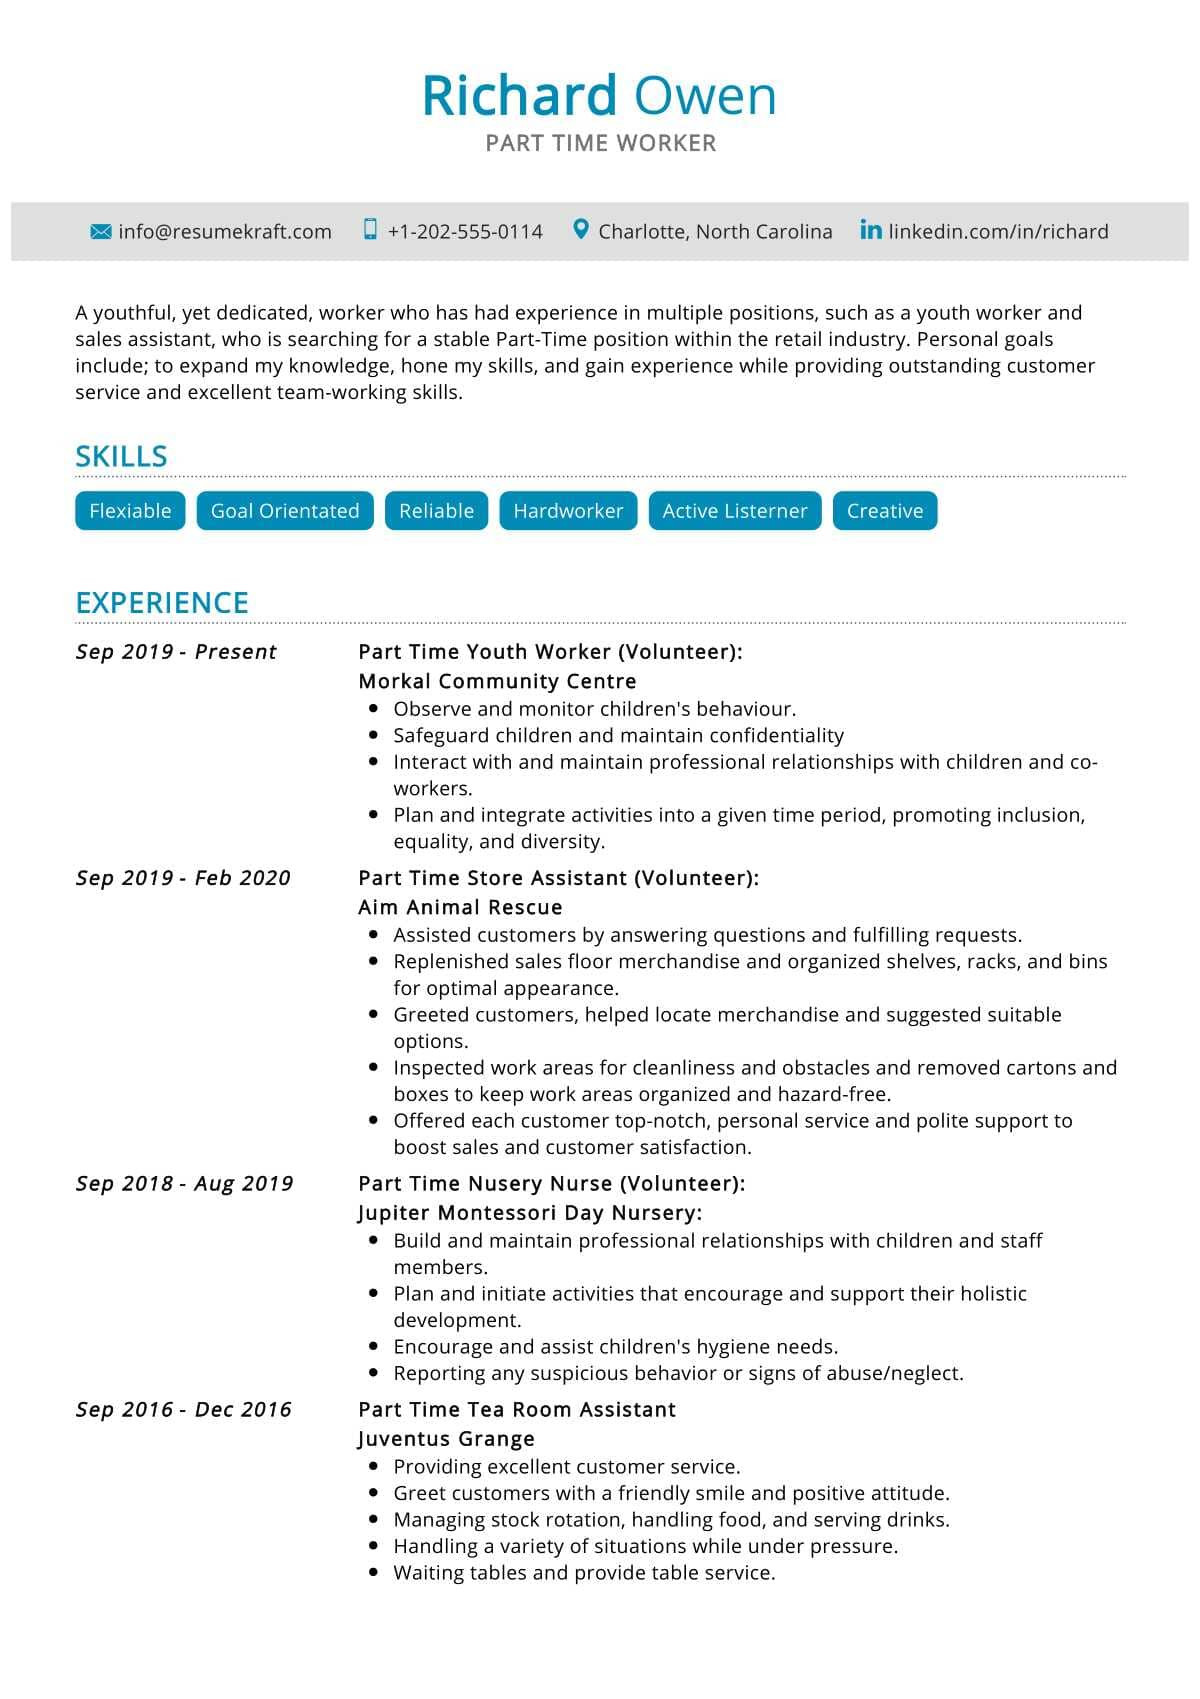 Sample Resume with Full and Part Time Experience Part-time Job Resume Sample 2022 Writing Tips – Resumekraft